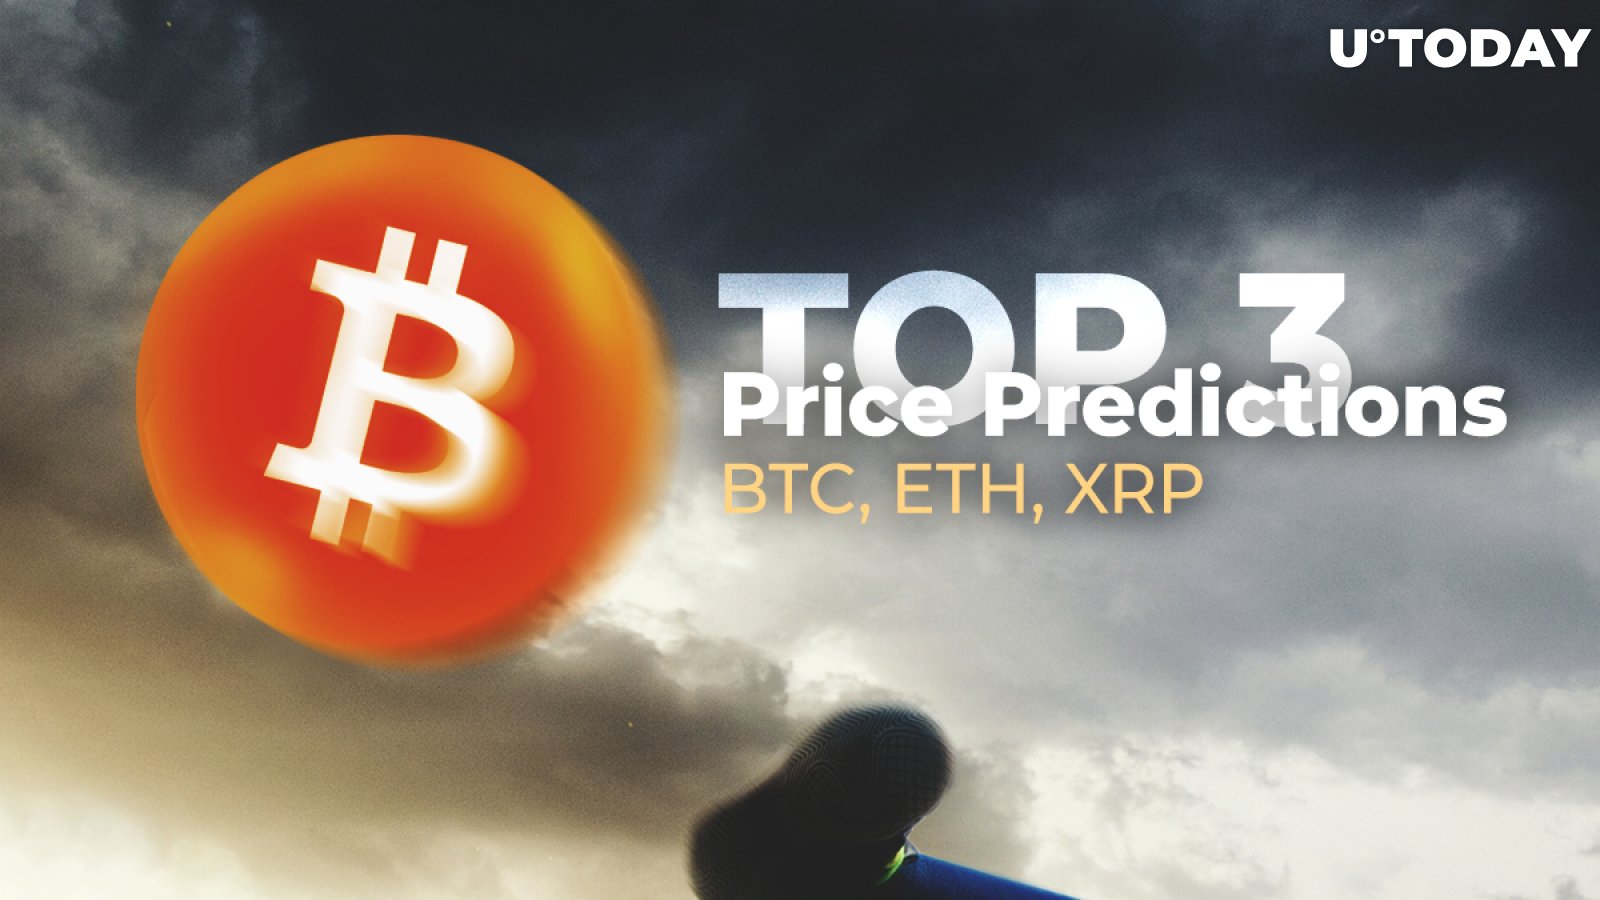 TOP 3 Price Predictions: BTC, ETH, XRP — Bitcoin Bounced Off $8,000 Support, Altcoins Are Looking For A Breakout